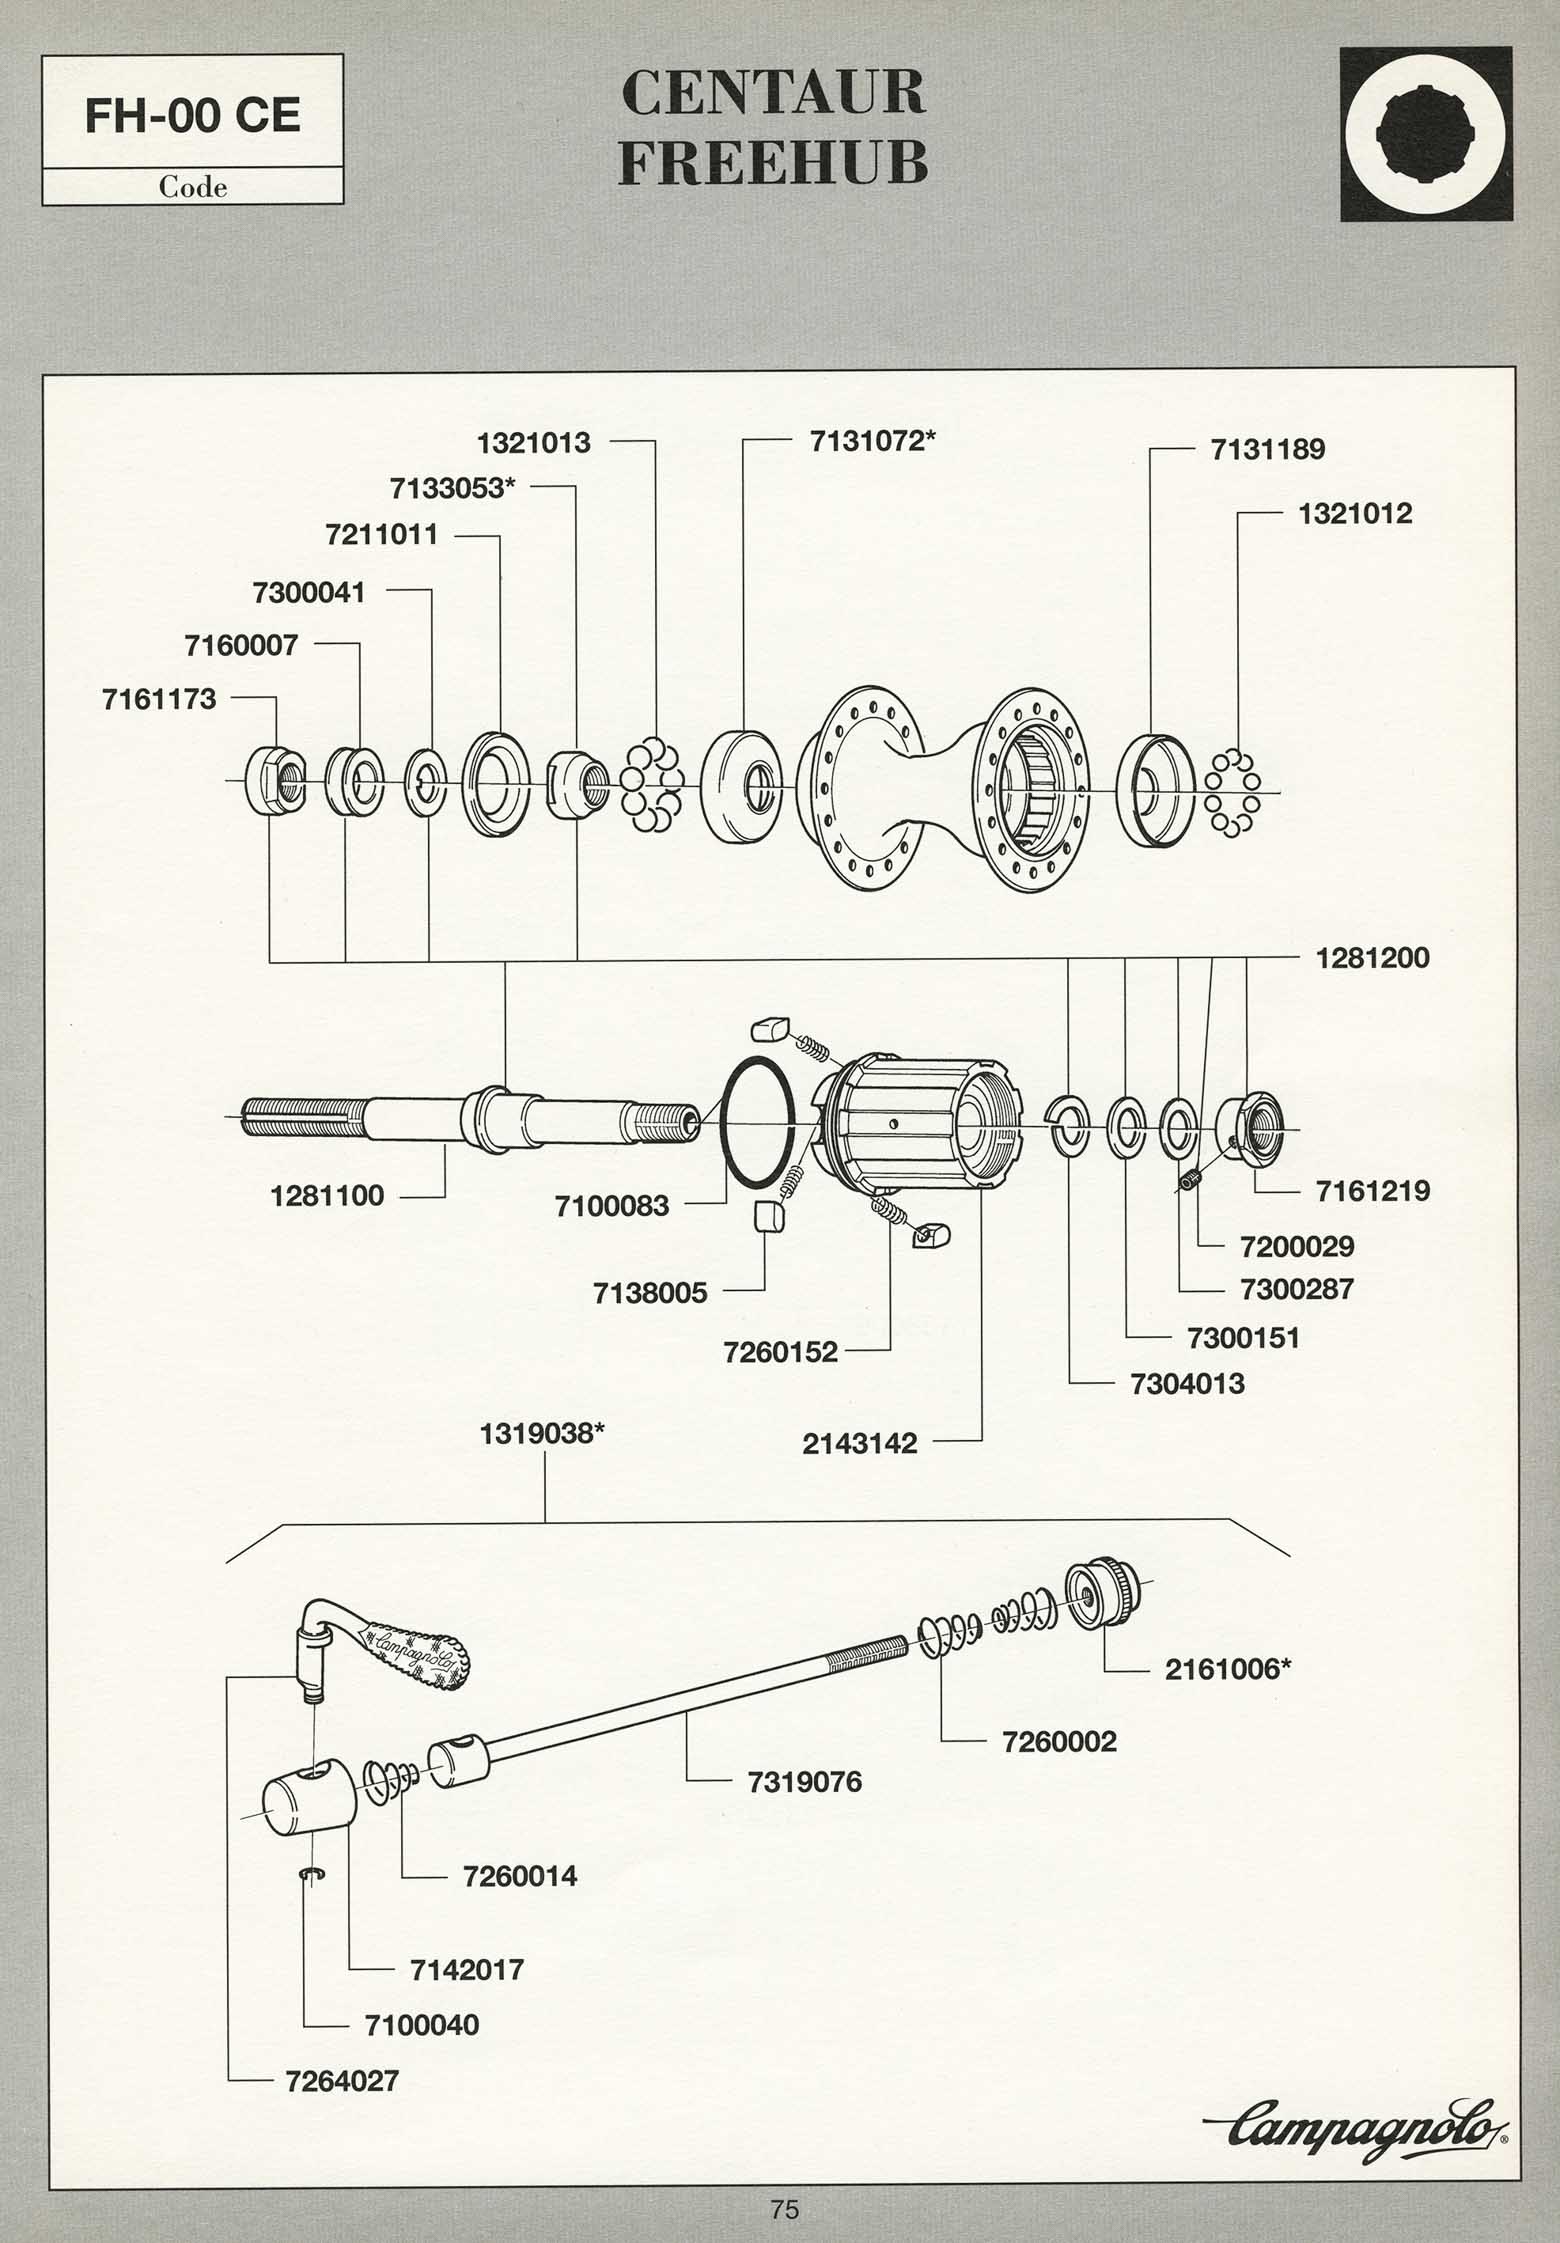 Campagnolo Spare Parts Catalogue - 1993 Product Range page 075 main image